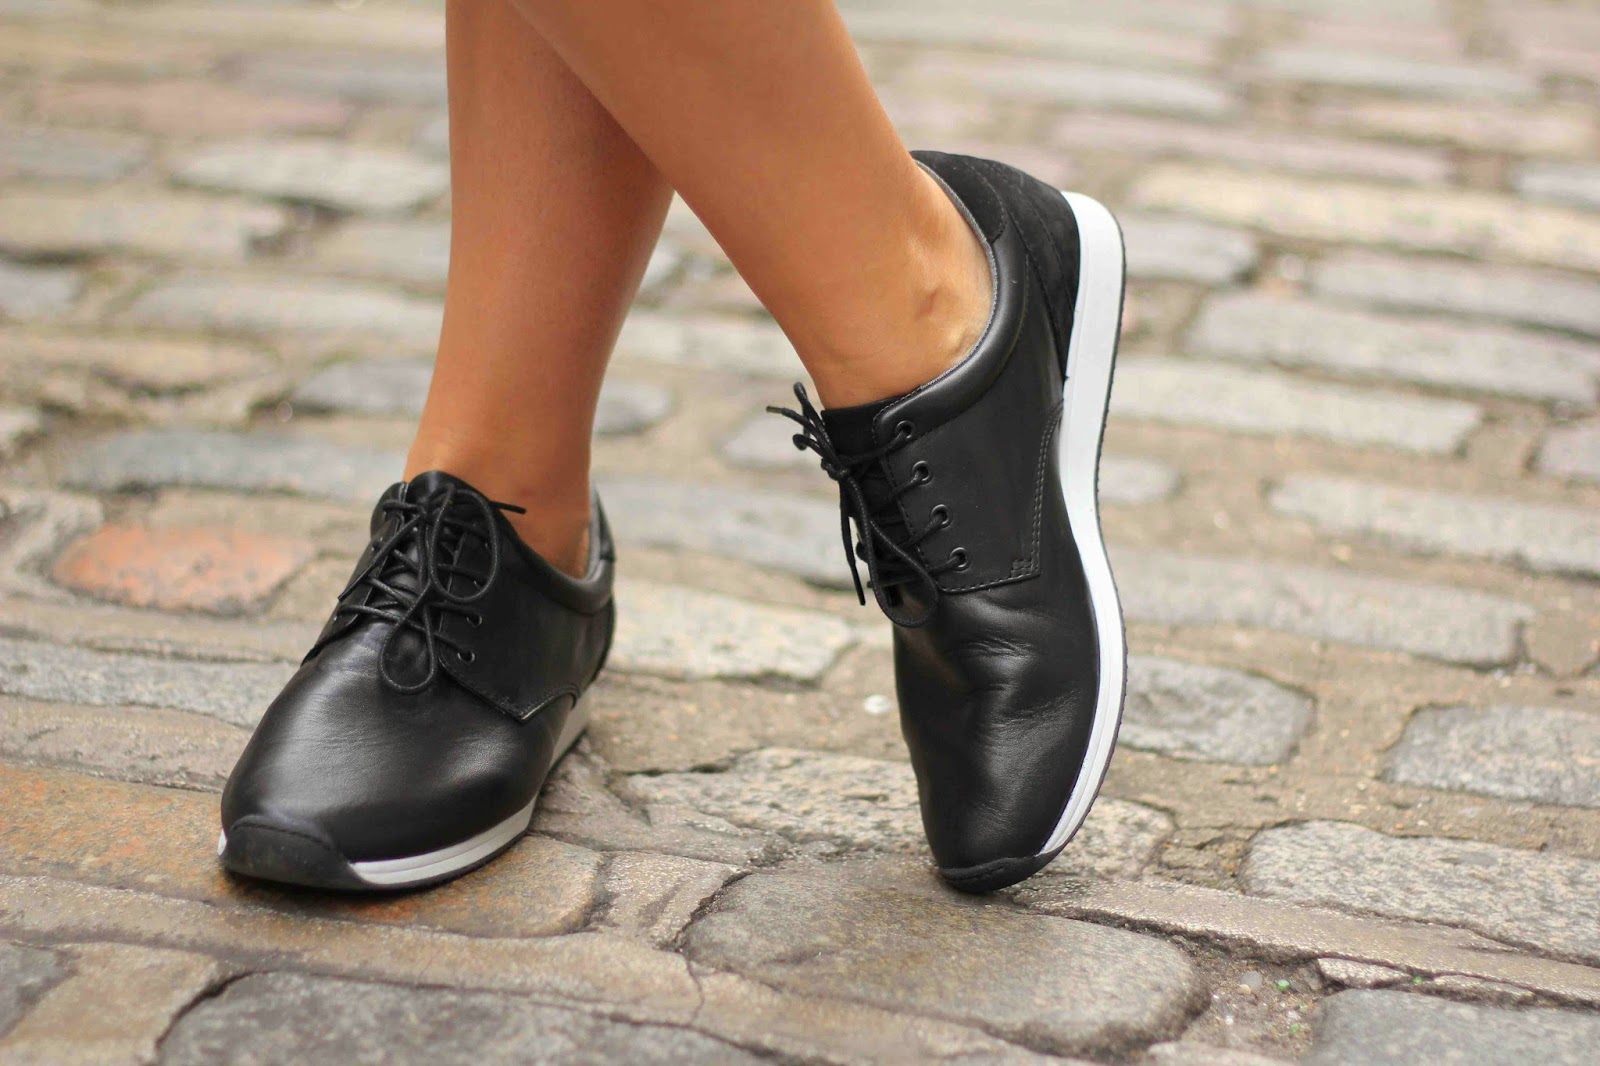 Outfit Post: Leather and Trainers - The 